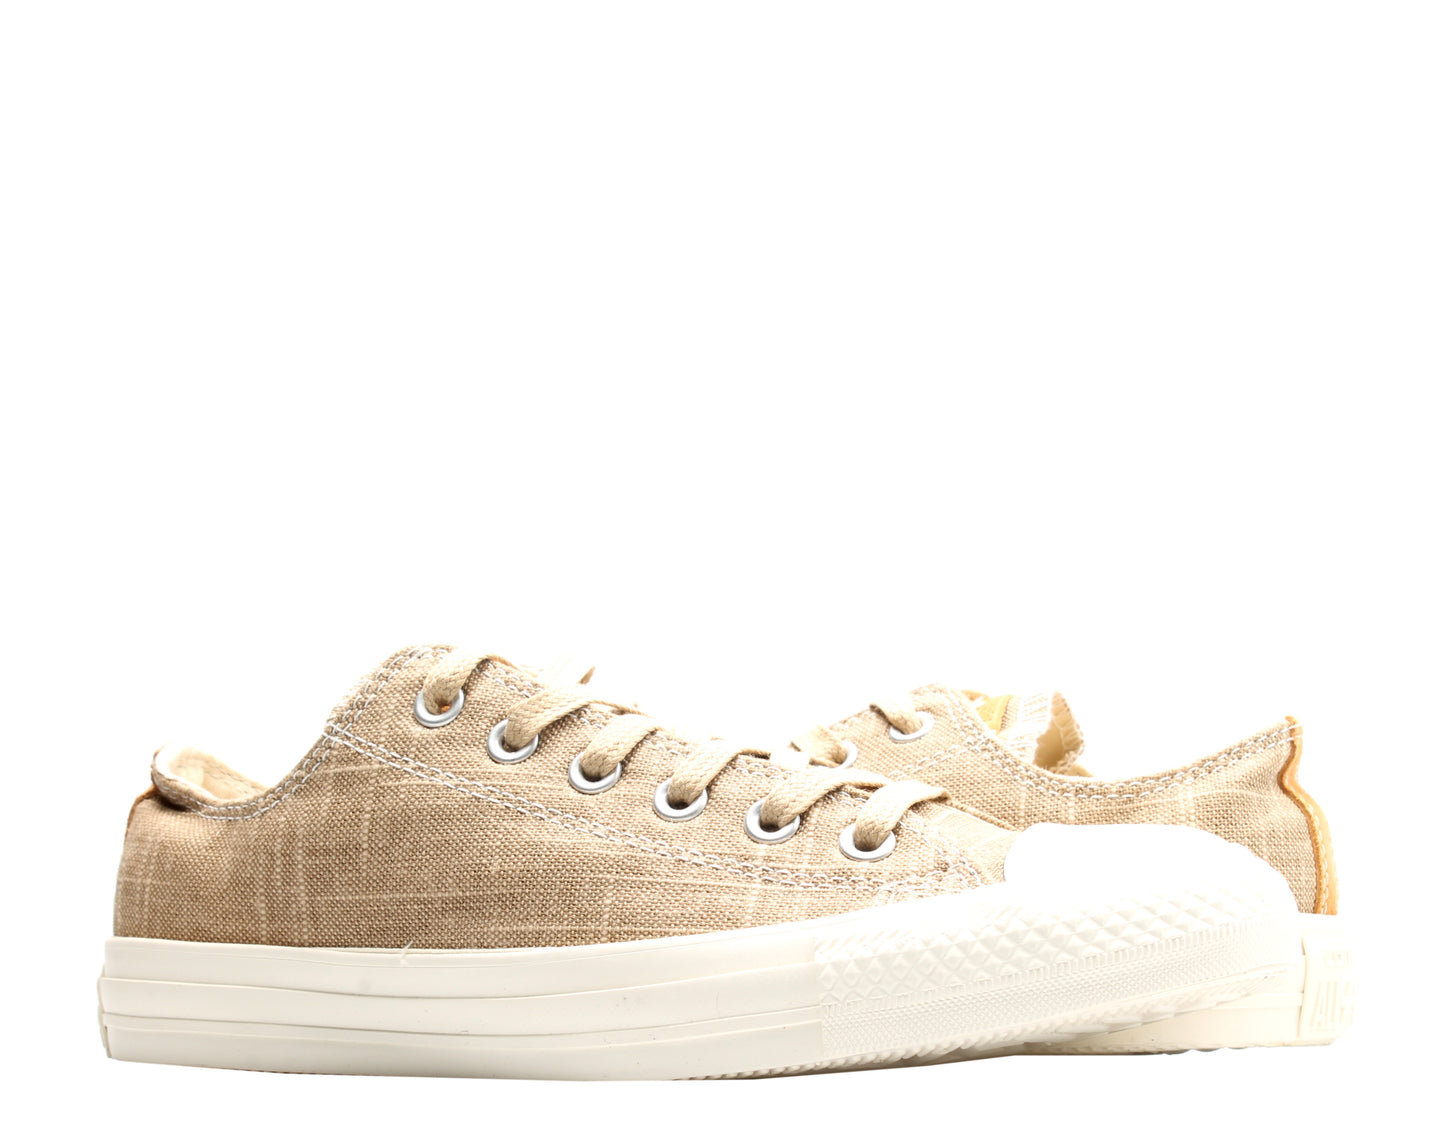 Converse Chuck Taylor All Star Ox Low Top Sneakers